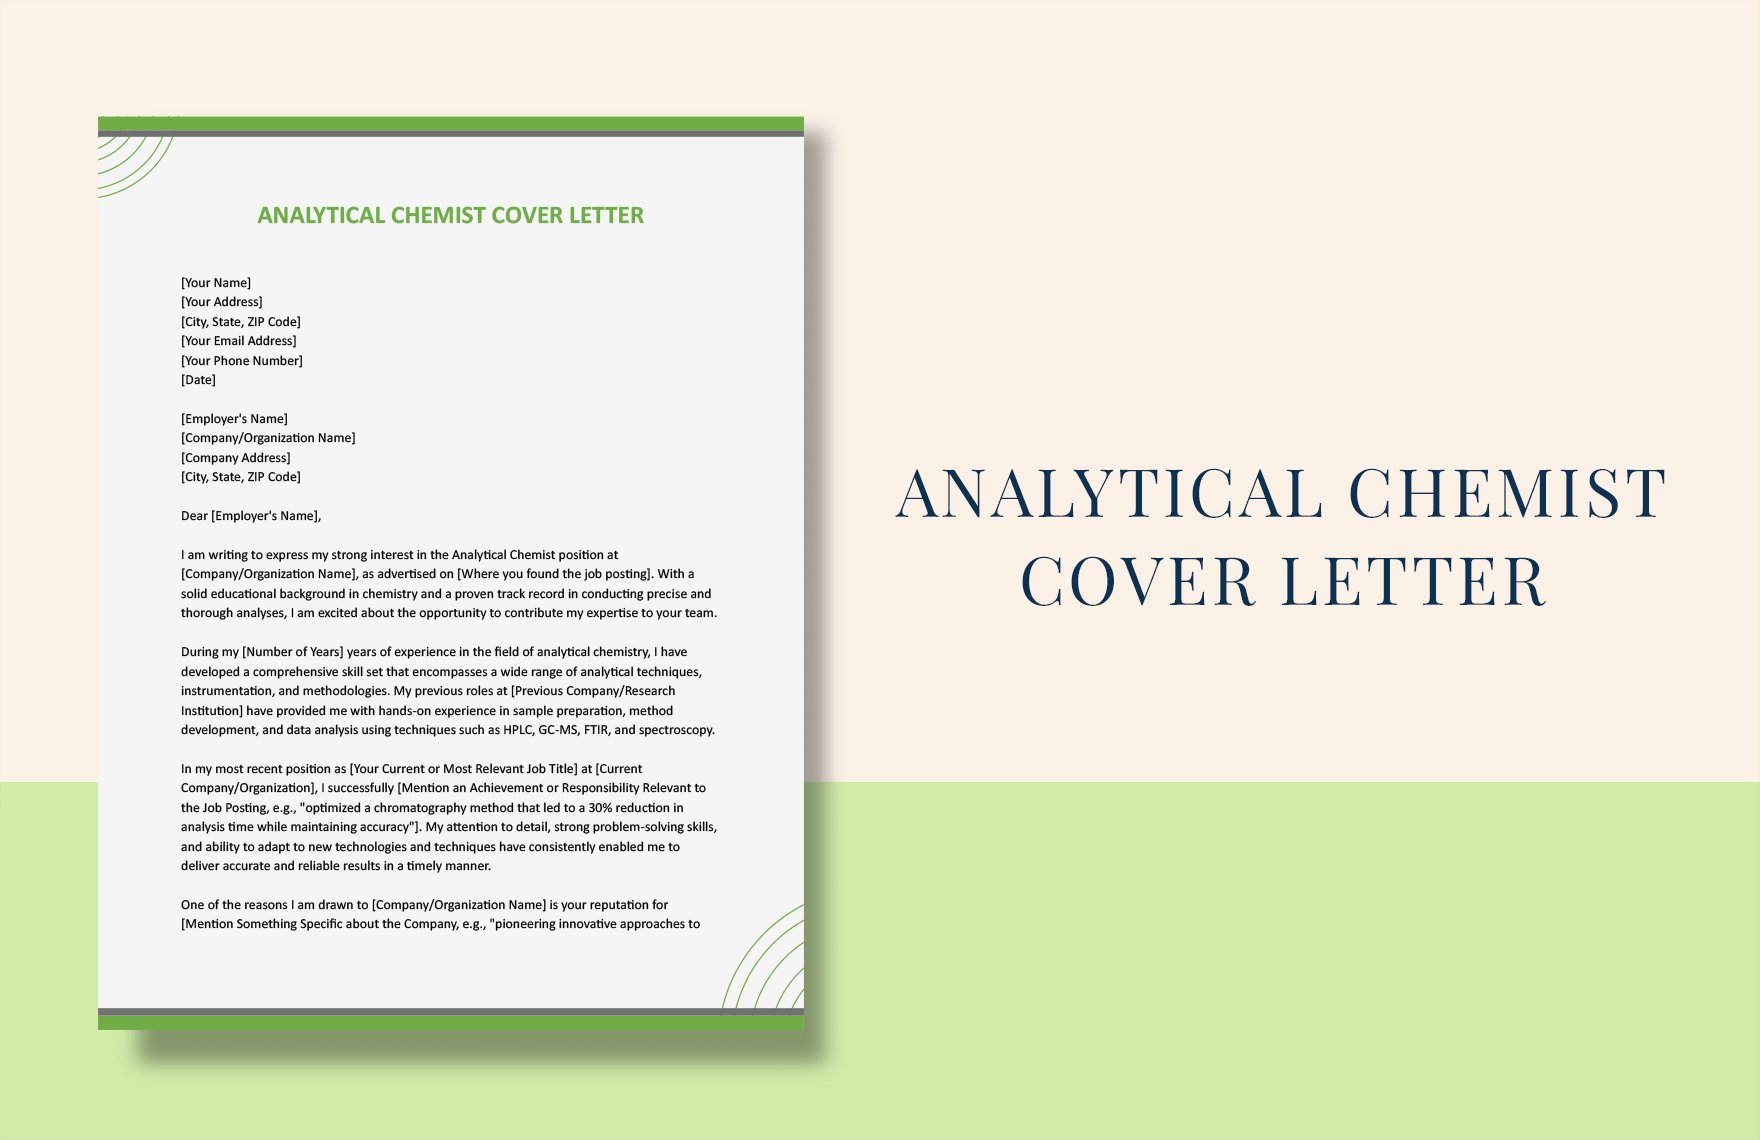 Analytical Chemist Cover Letter in Word, Google Docs